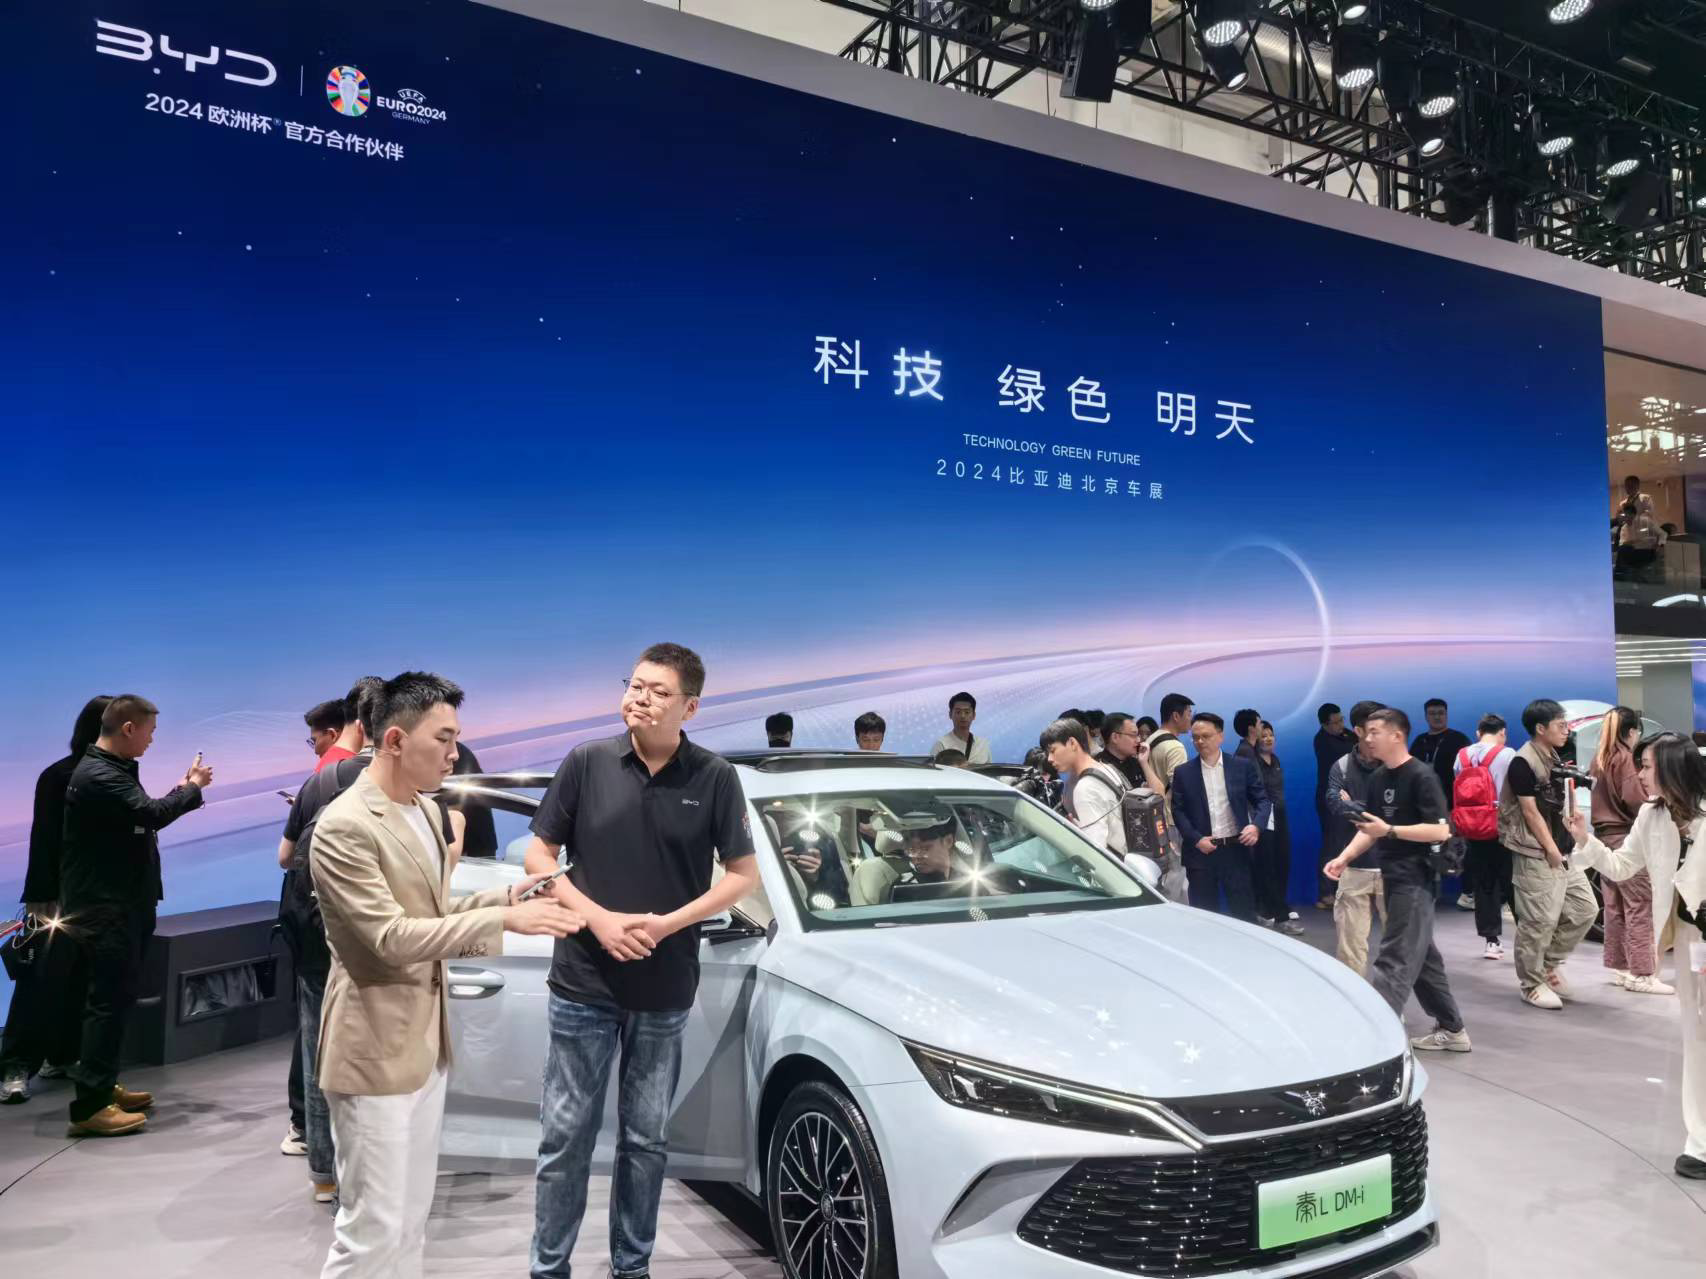 A product launch event by Geely at the Beijing International Automotive Exhibition on April 25 
Photo: Zhang Yiyi/GT

